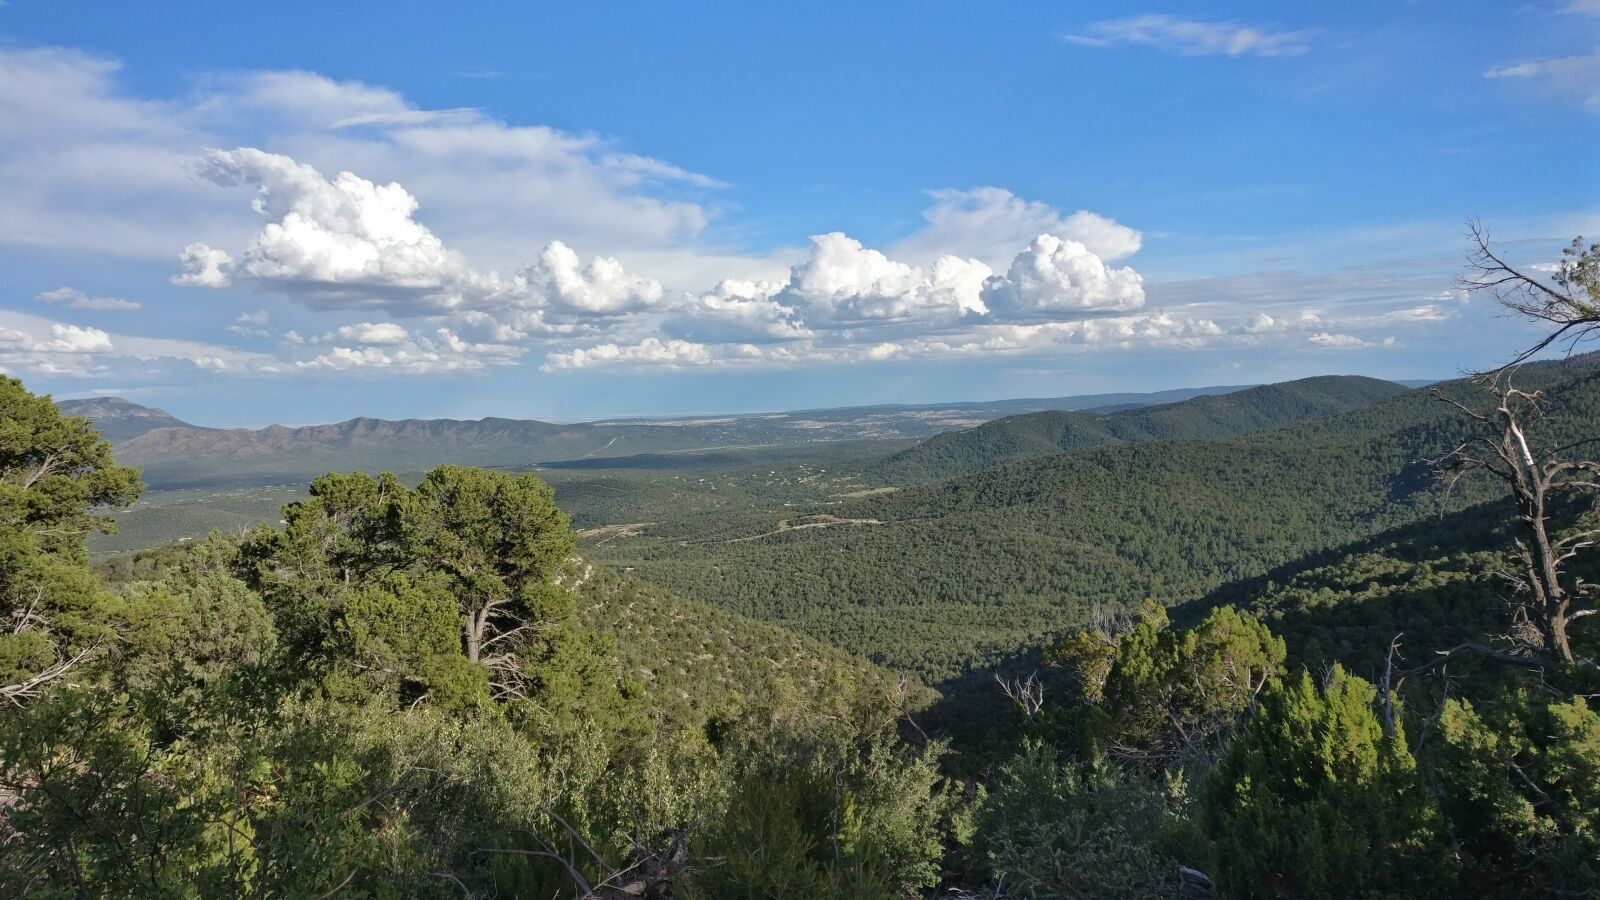 OnePlus A3000 sample photo. New mexico, sky, clouds photography